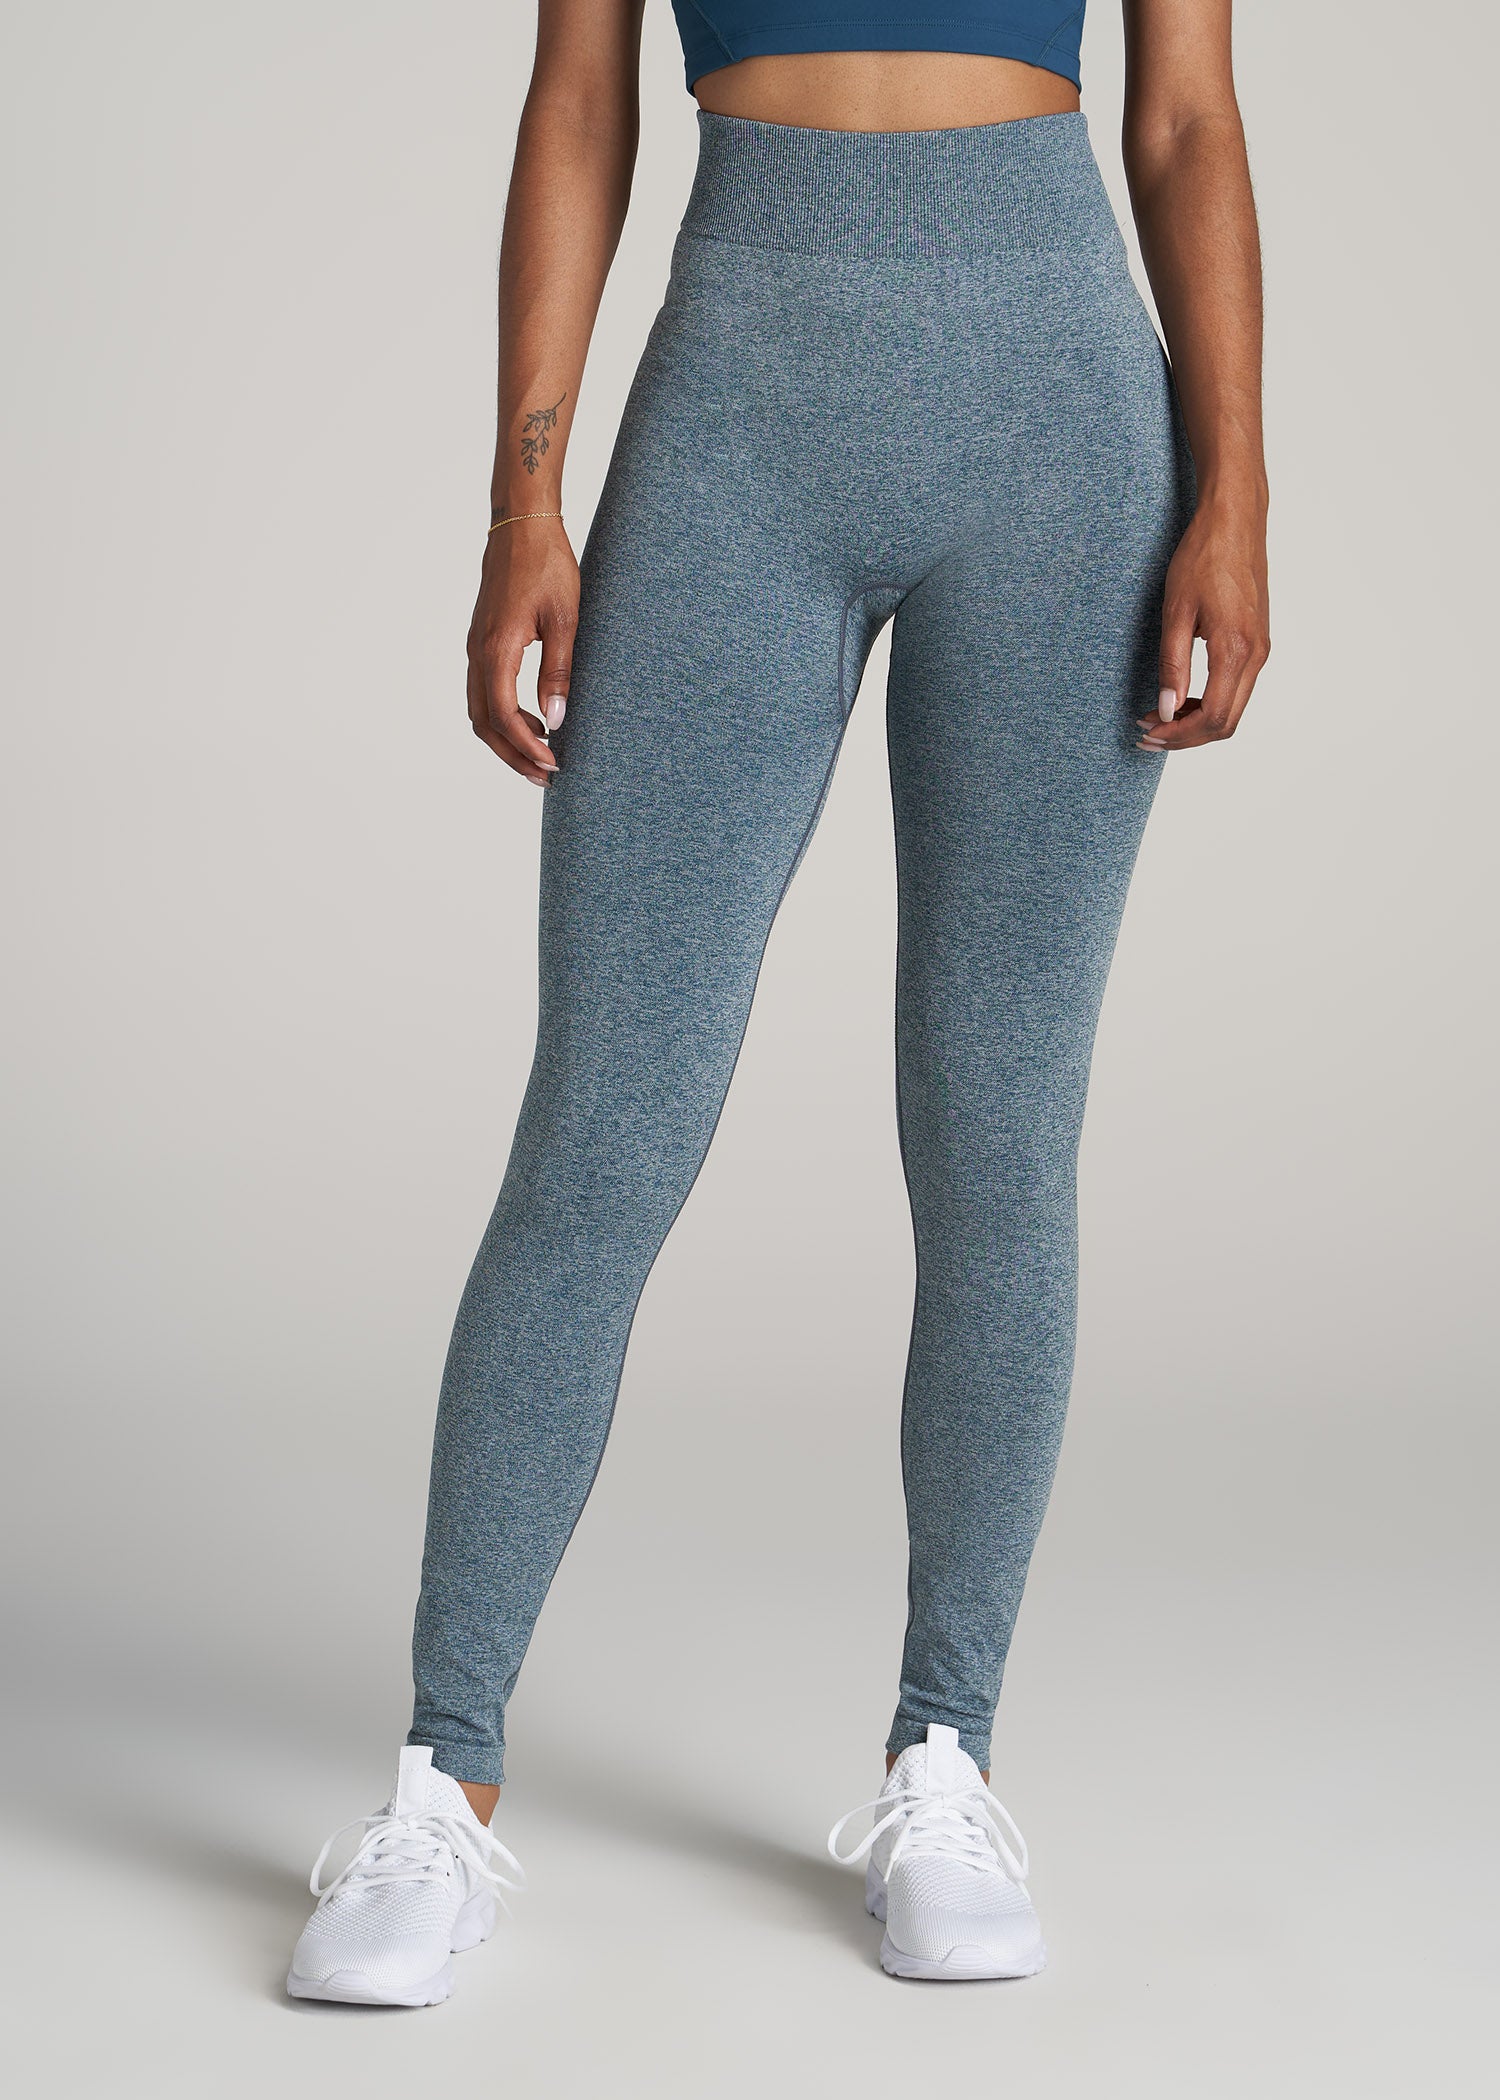 What Are Compression Leggings?